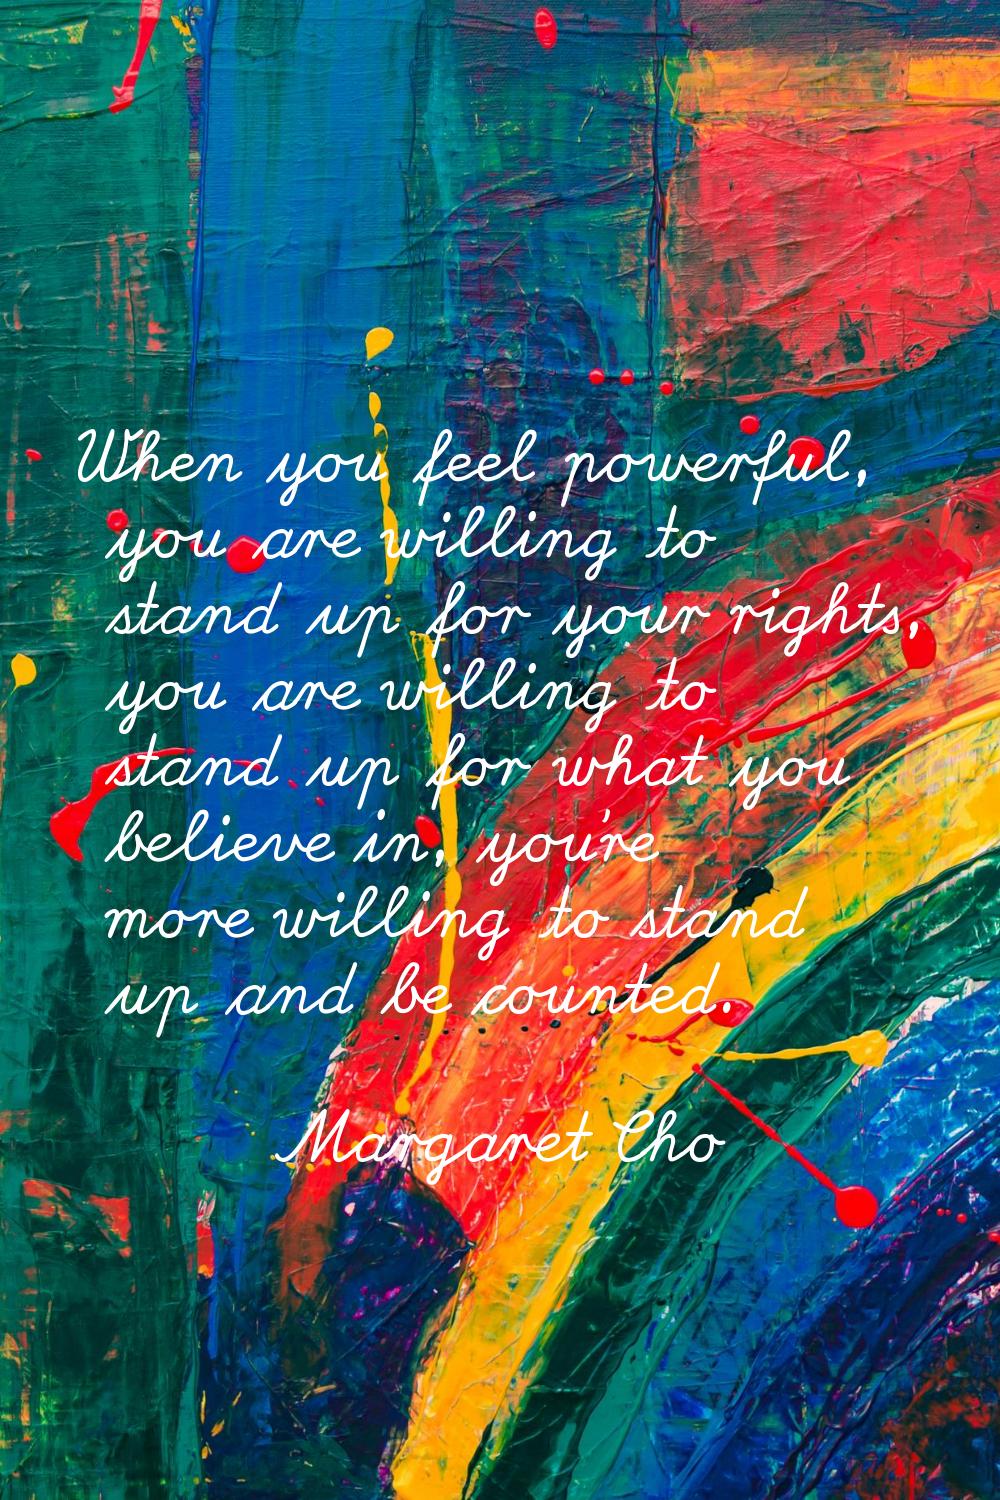 When you feel powerful, you are willing to stand up for your rights, you are willing to stand up fo